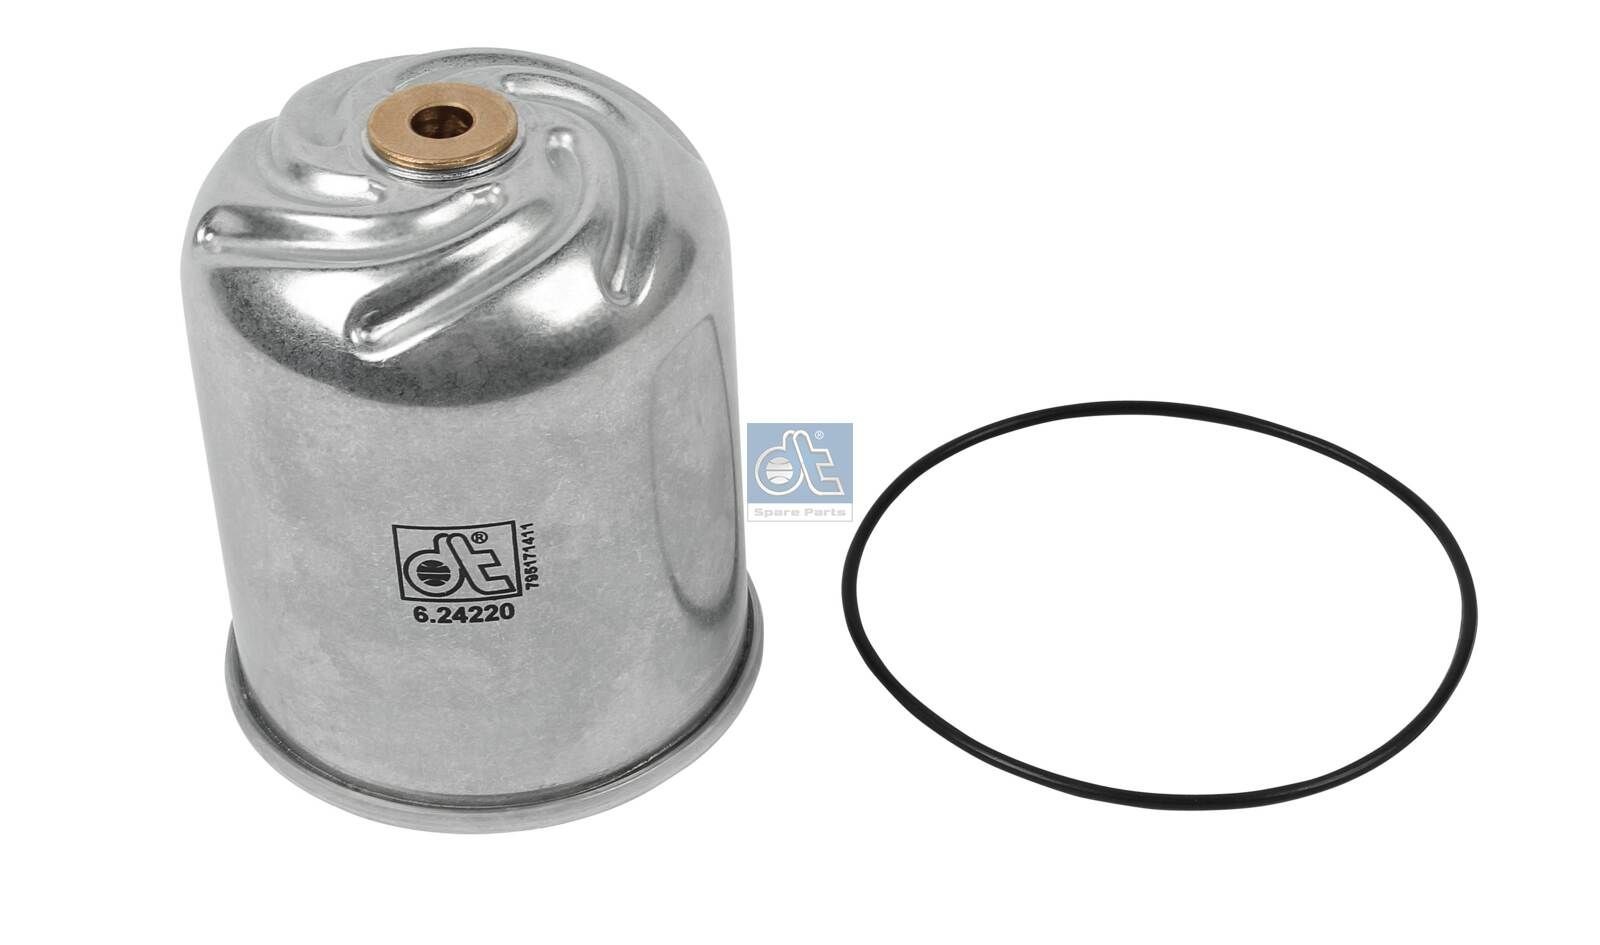 ZR 904 x DT Spare Parts 6.24220 Oil filter 236-GB-245M